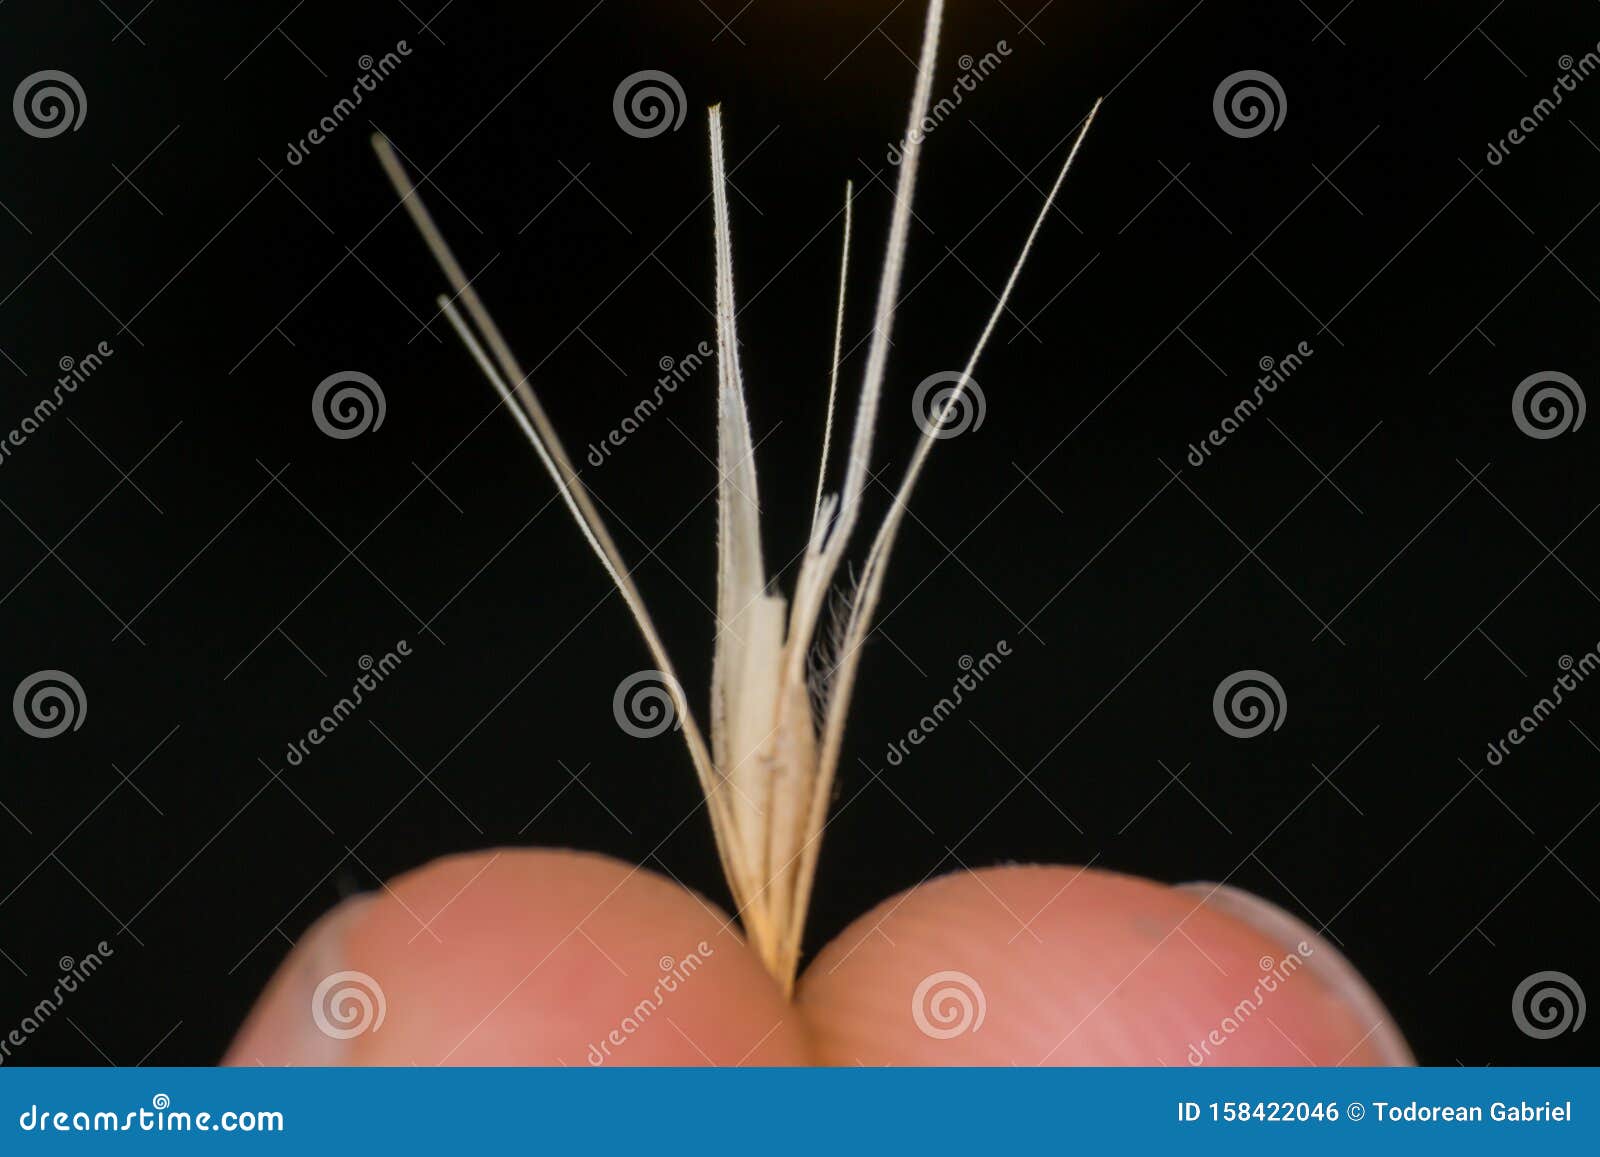 macro photo of a tiny arrowheads of the foxtail grass. when a dog enters my consulting room shaking its head or licking its paw